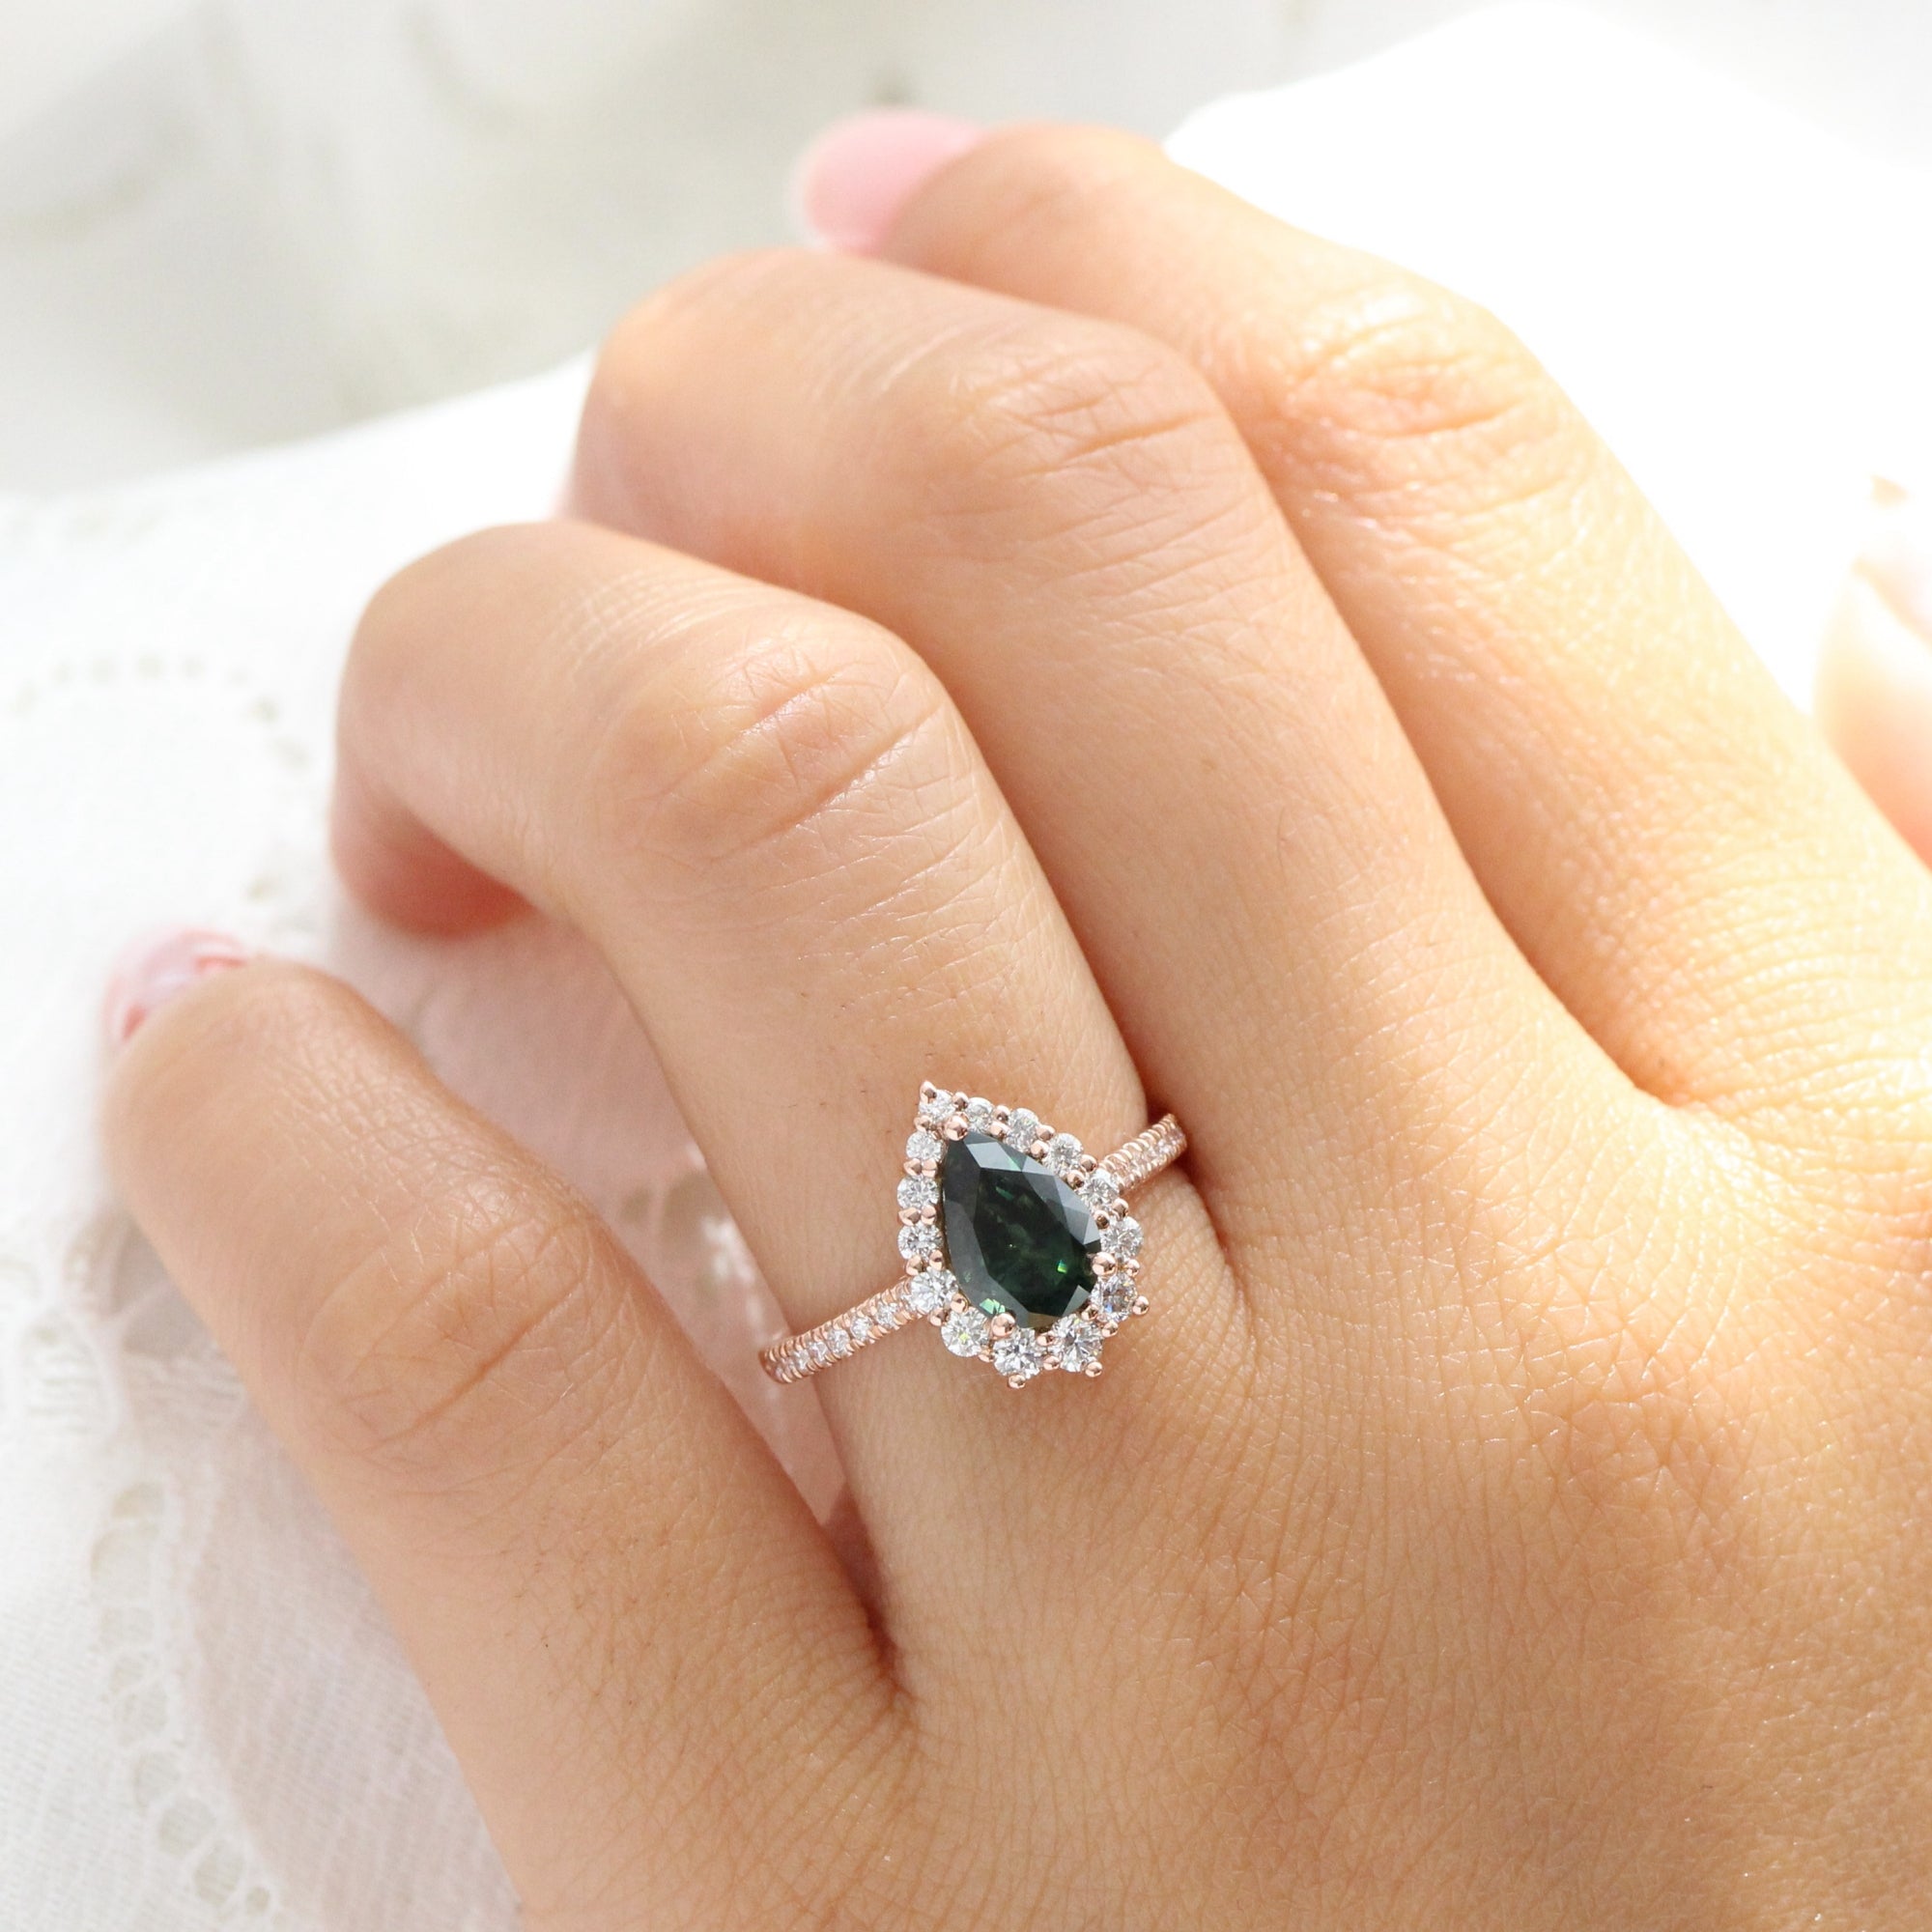 teal green sapphire engagement ring halo diamond pear engagement ring la more design jewelry